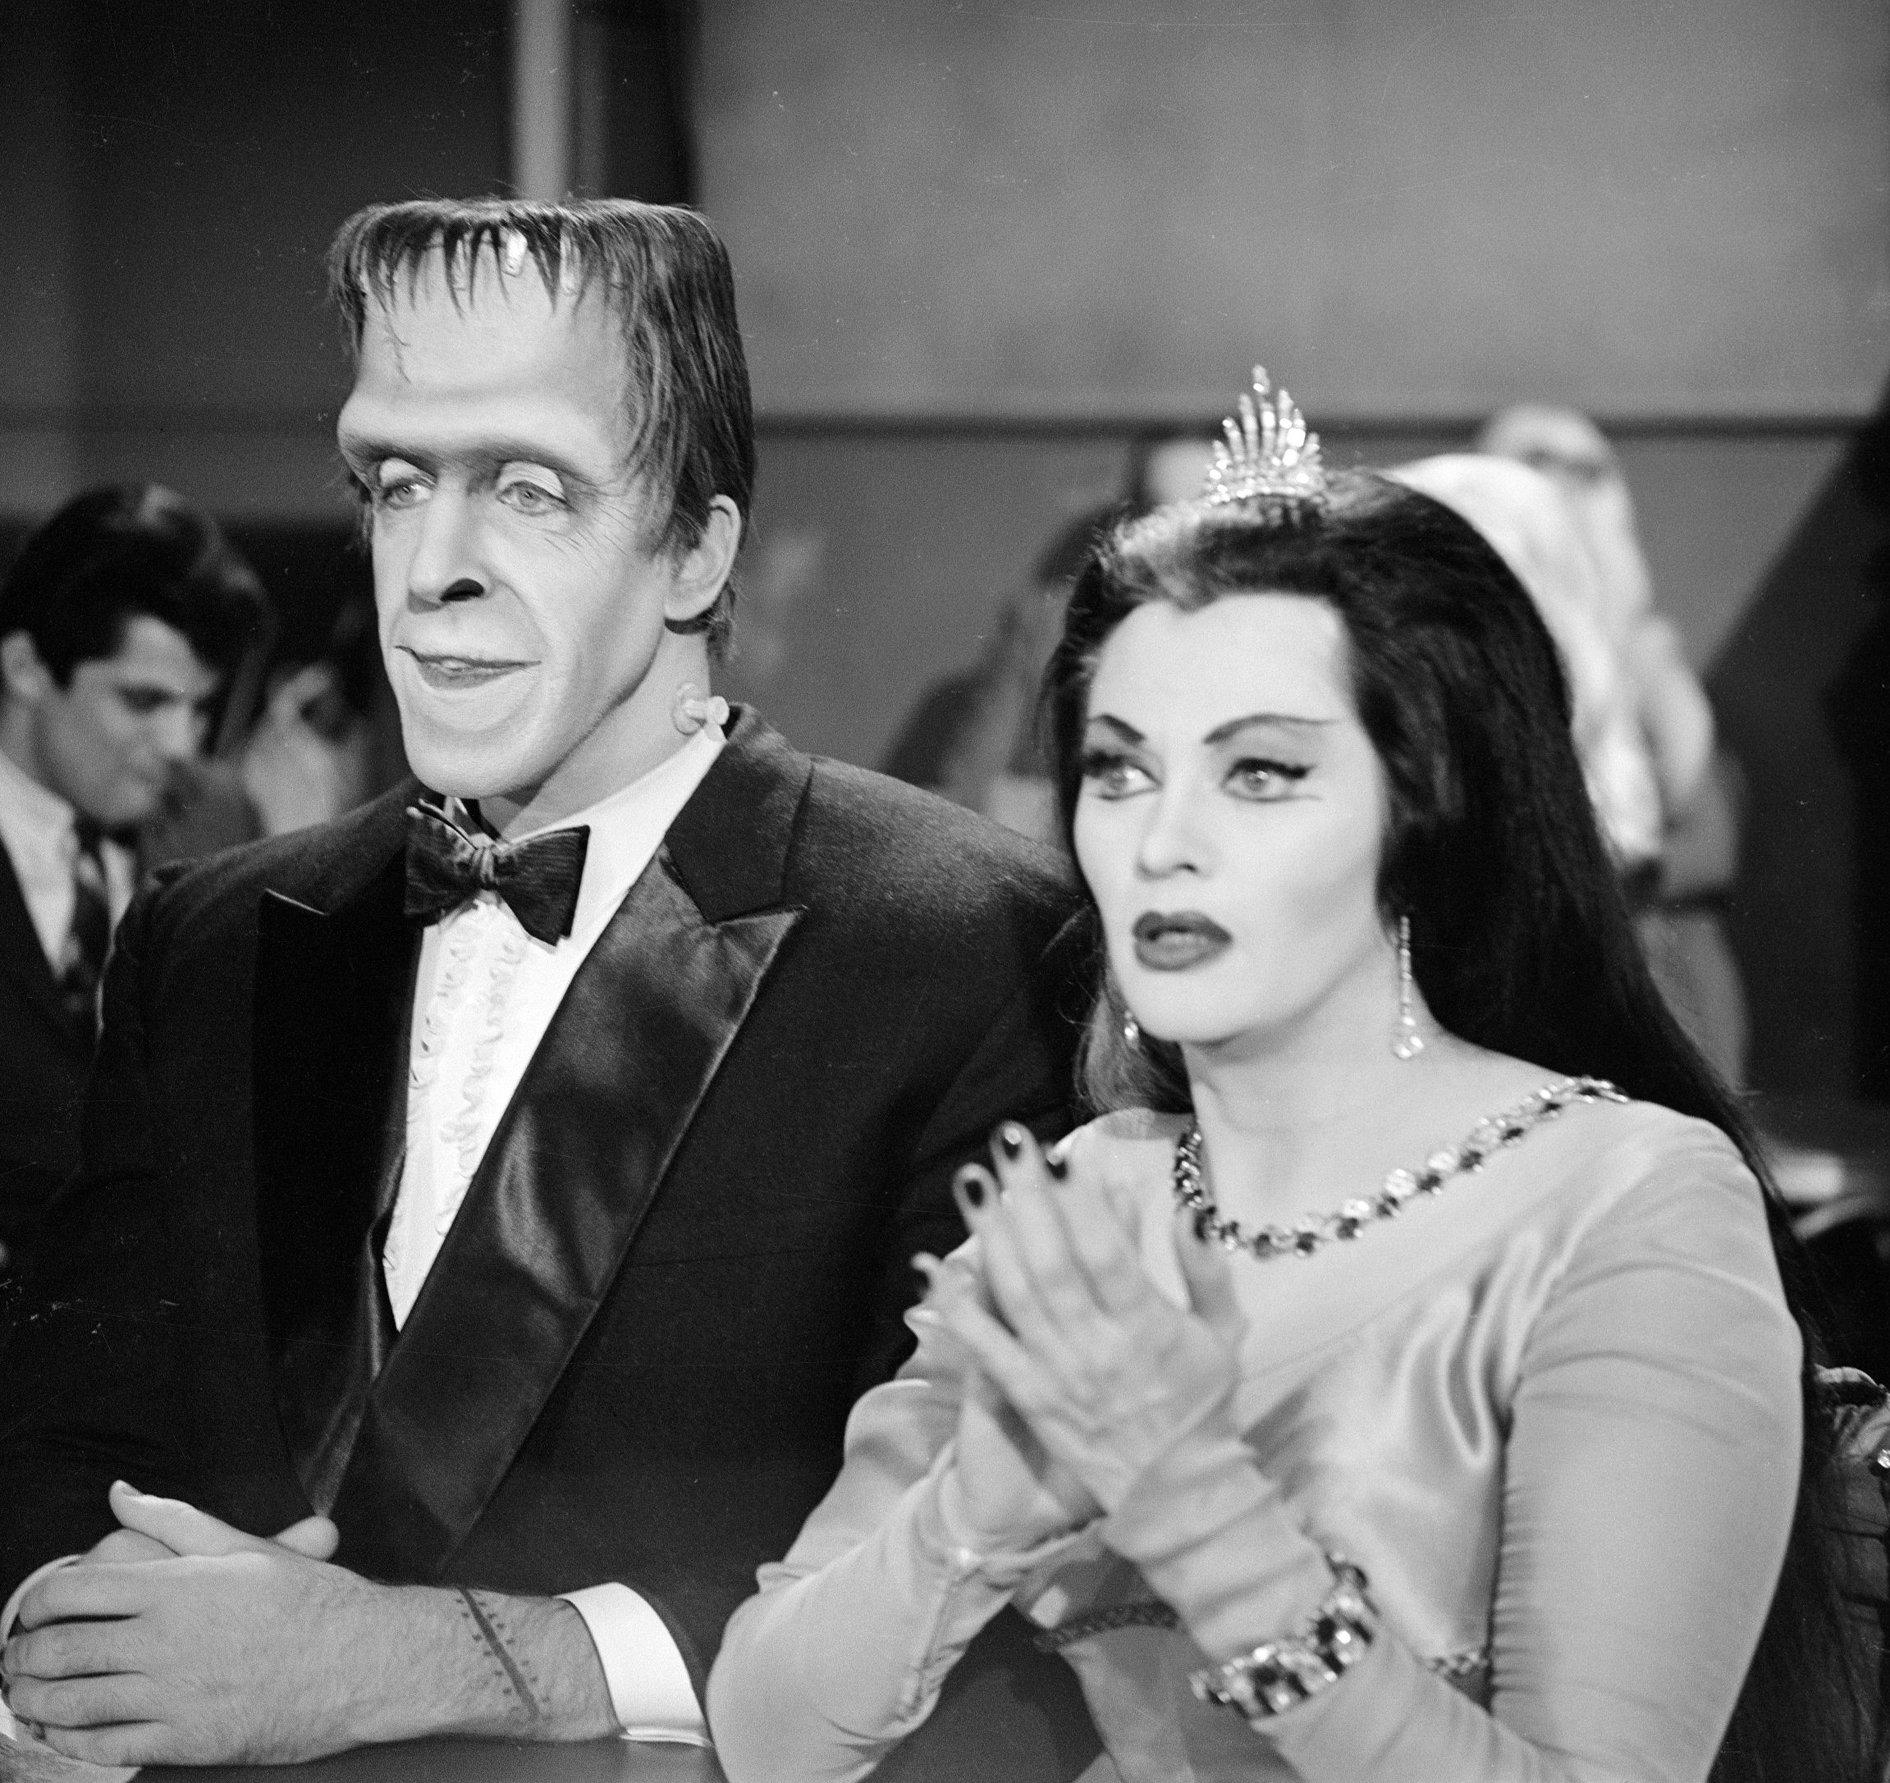 'The Munsters' actor Fred Gwynne in his Frankenstein costume and tuxedo, and Yvonne De Carlo dressed as a vampire in an evening gown for a scene in the CBS comedy.